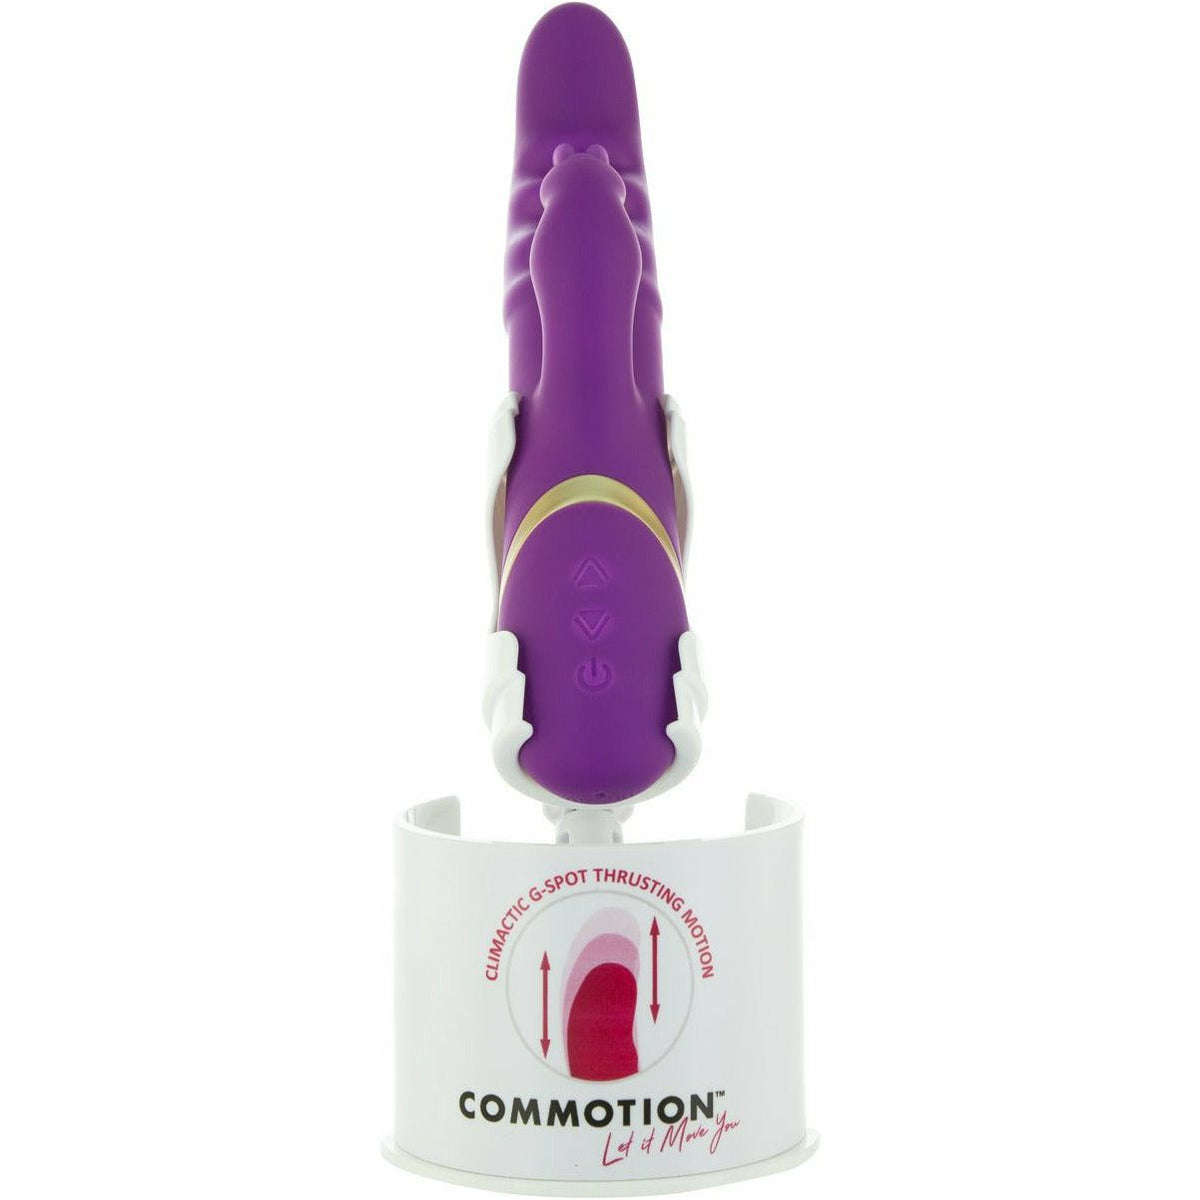 Commotion Commotion Cha Cha Display Cup with Tester - Limit of 1 per store